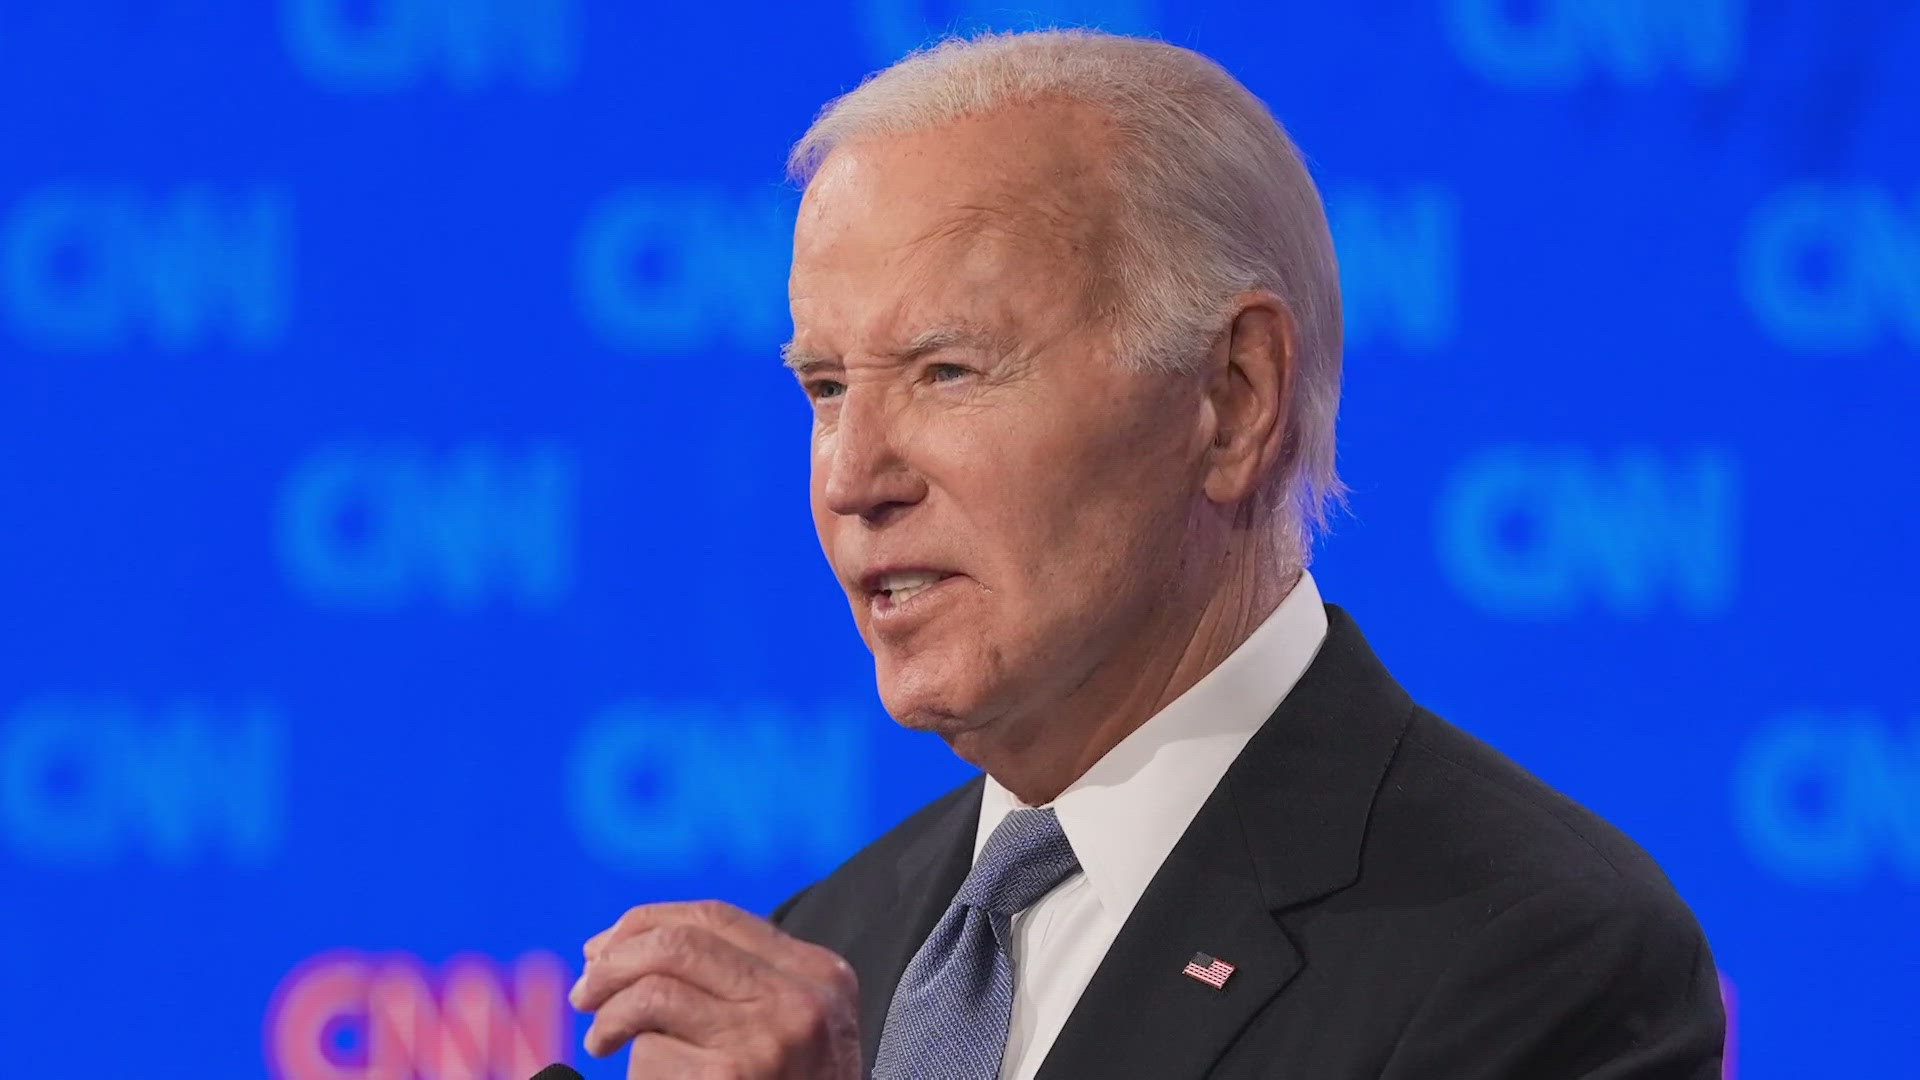 Both Democrats and Republicans are reacting to Biden's debate performance.